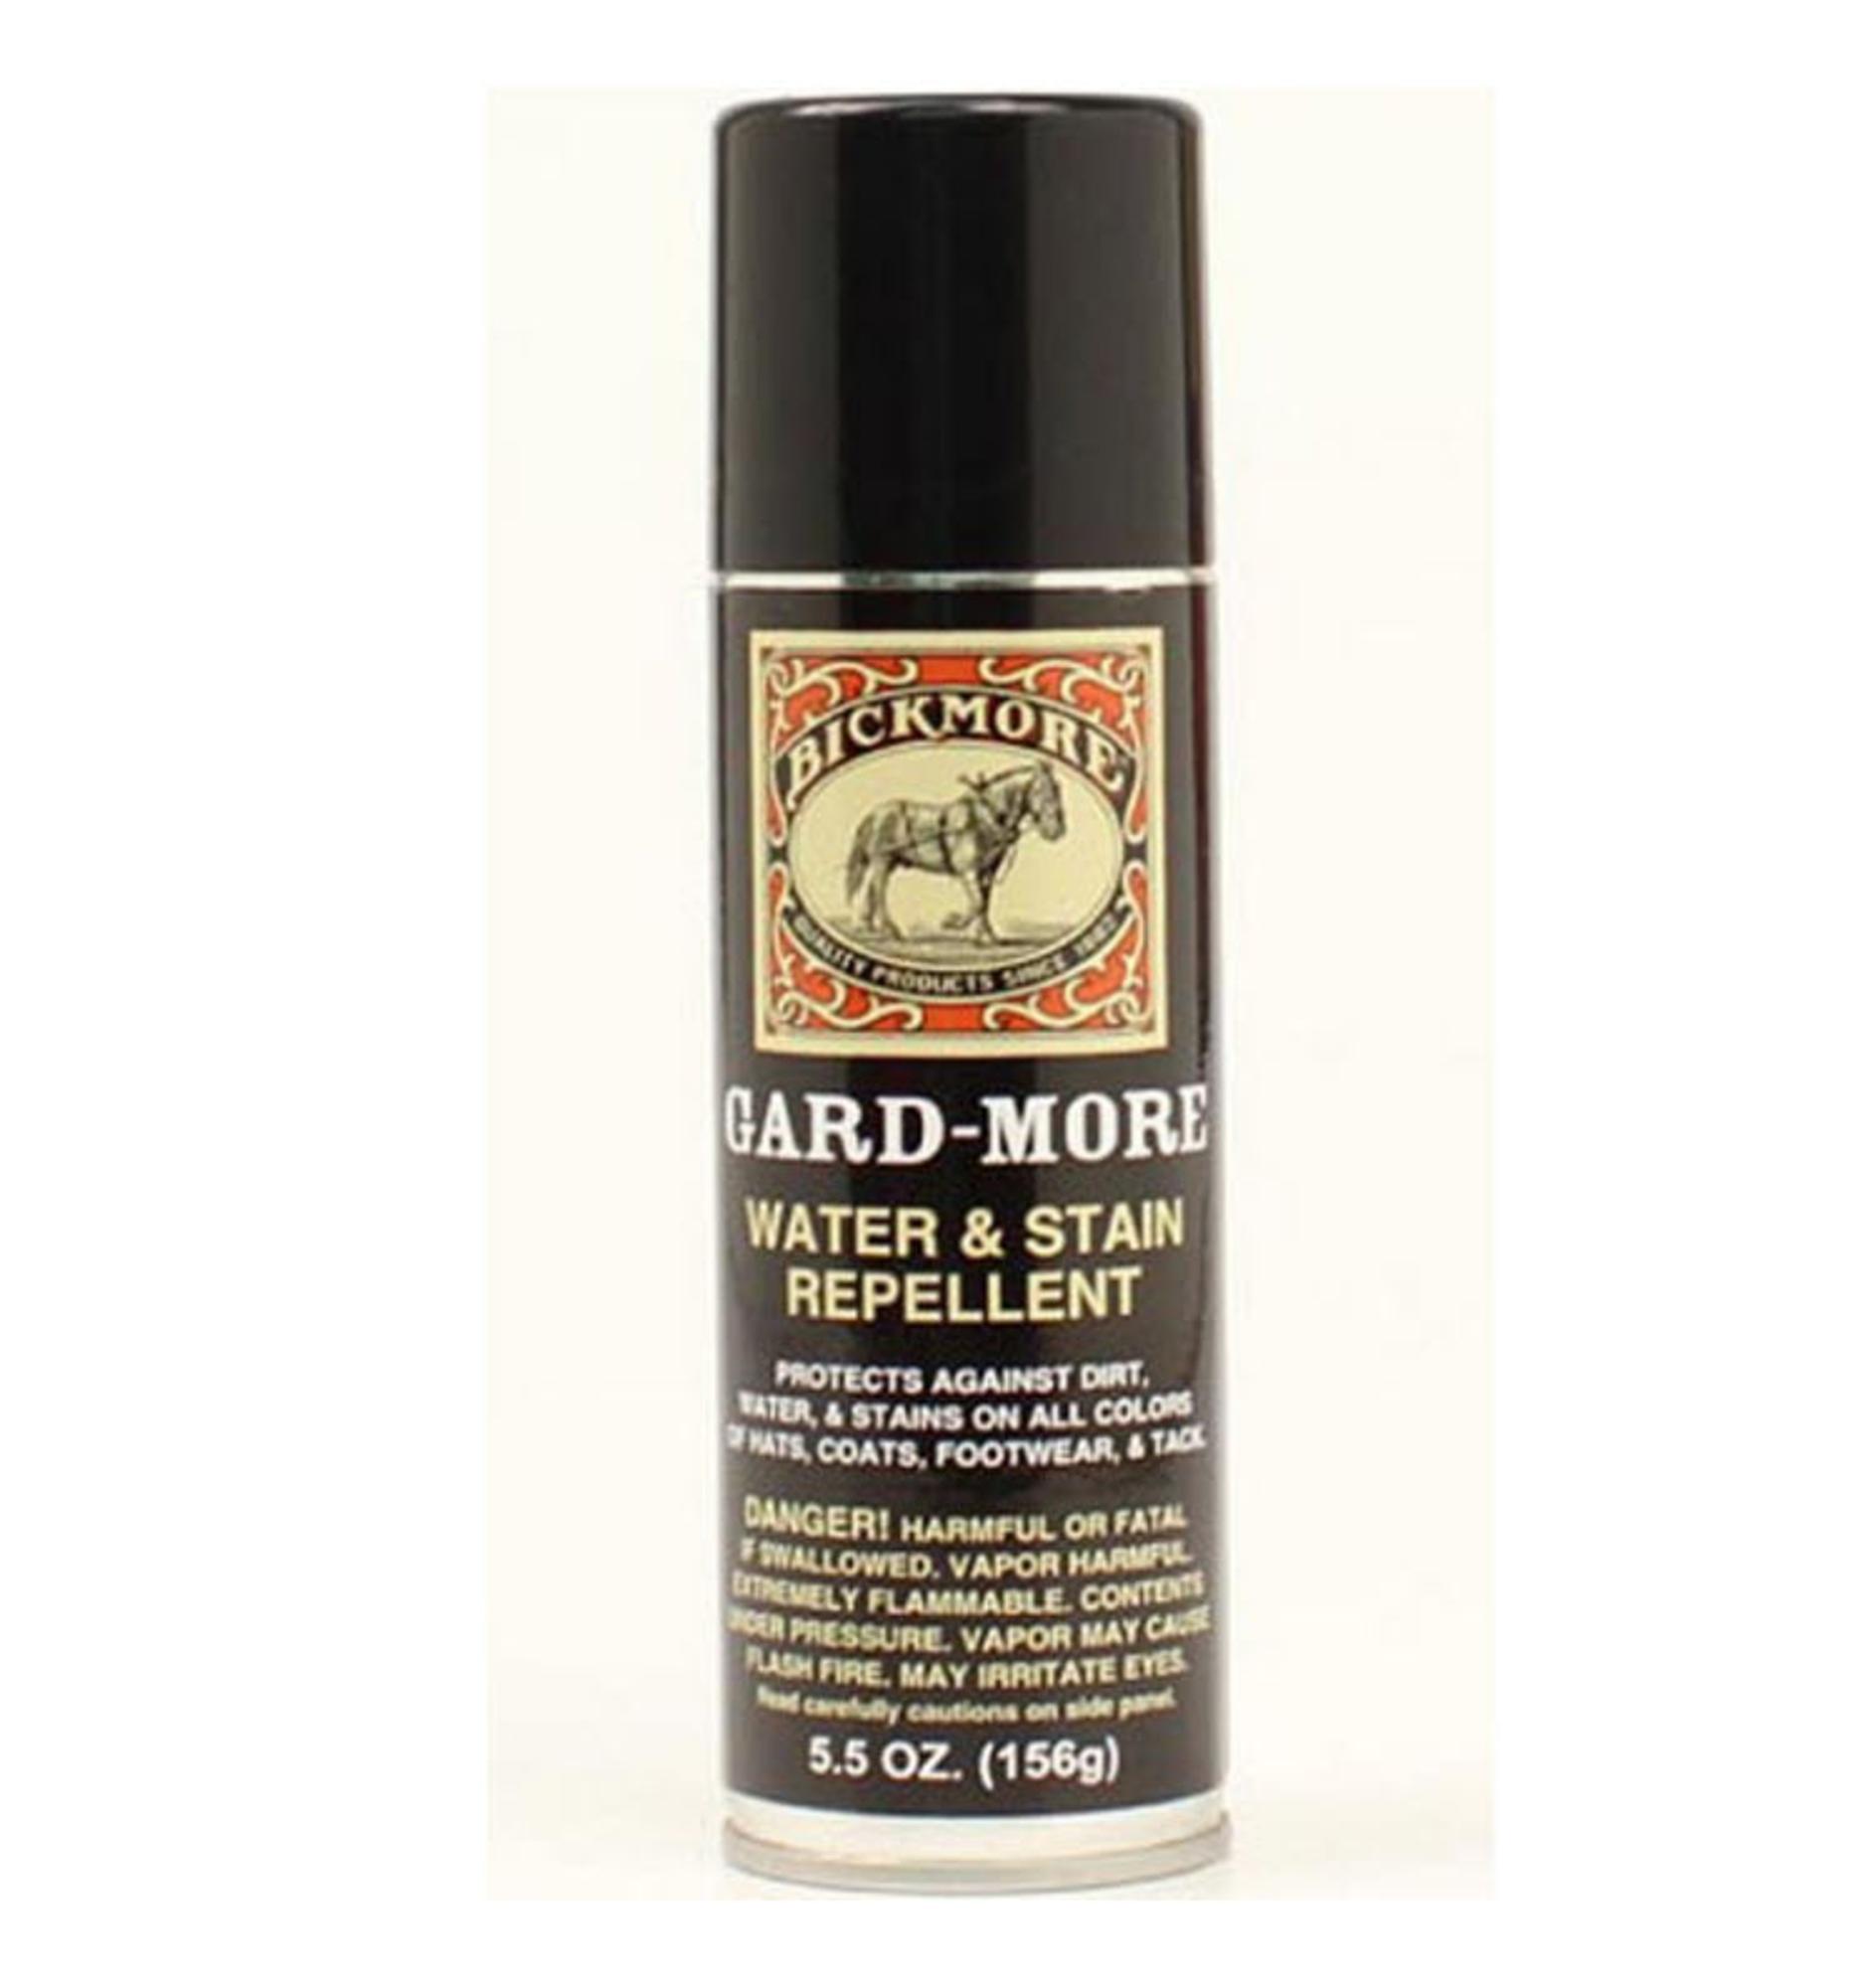 Bickmore Gard-More Water & Stain Repellent 5.5oz Spray USA made